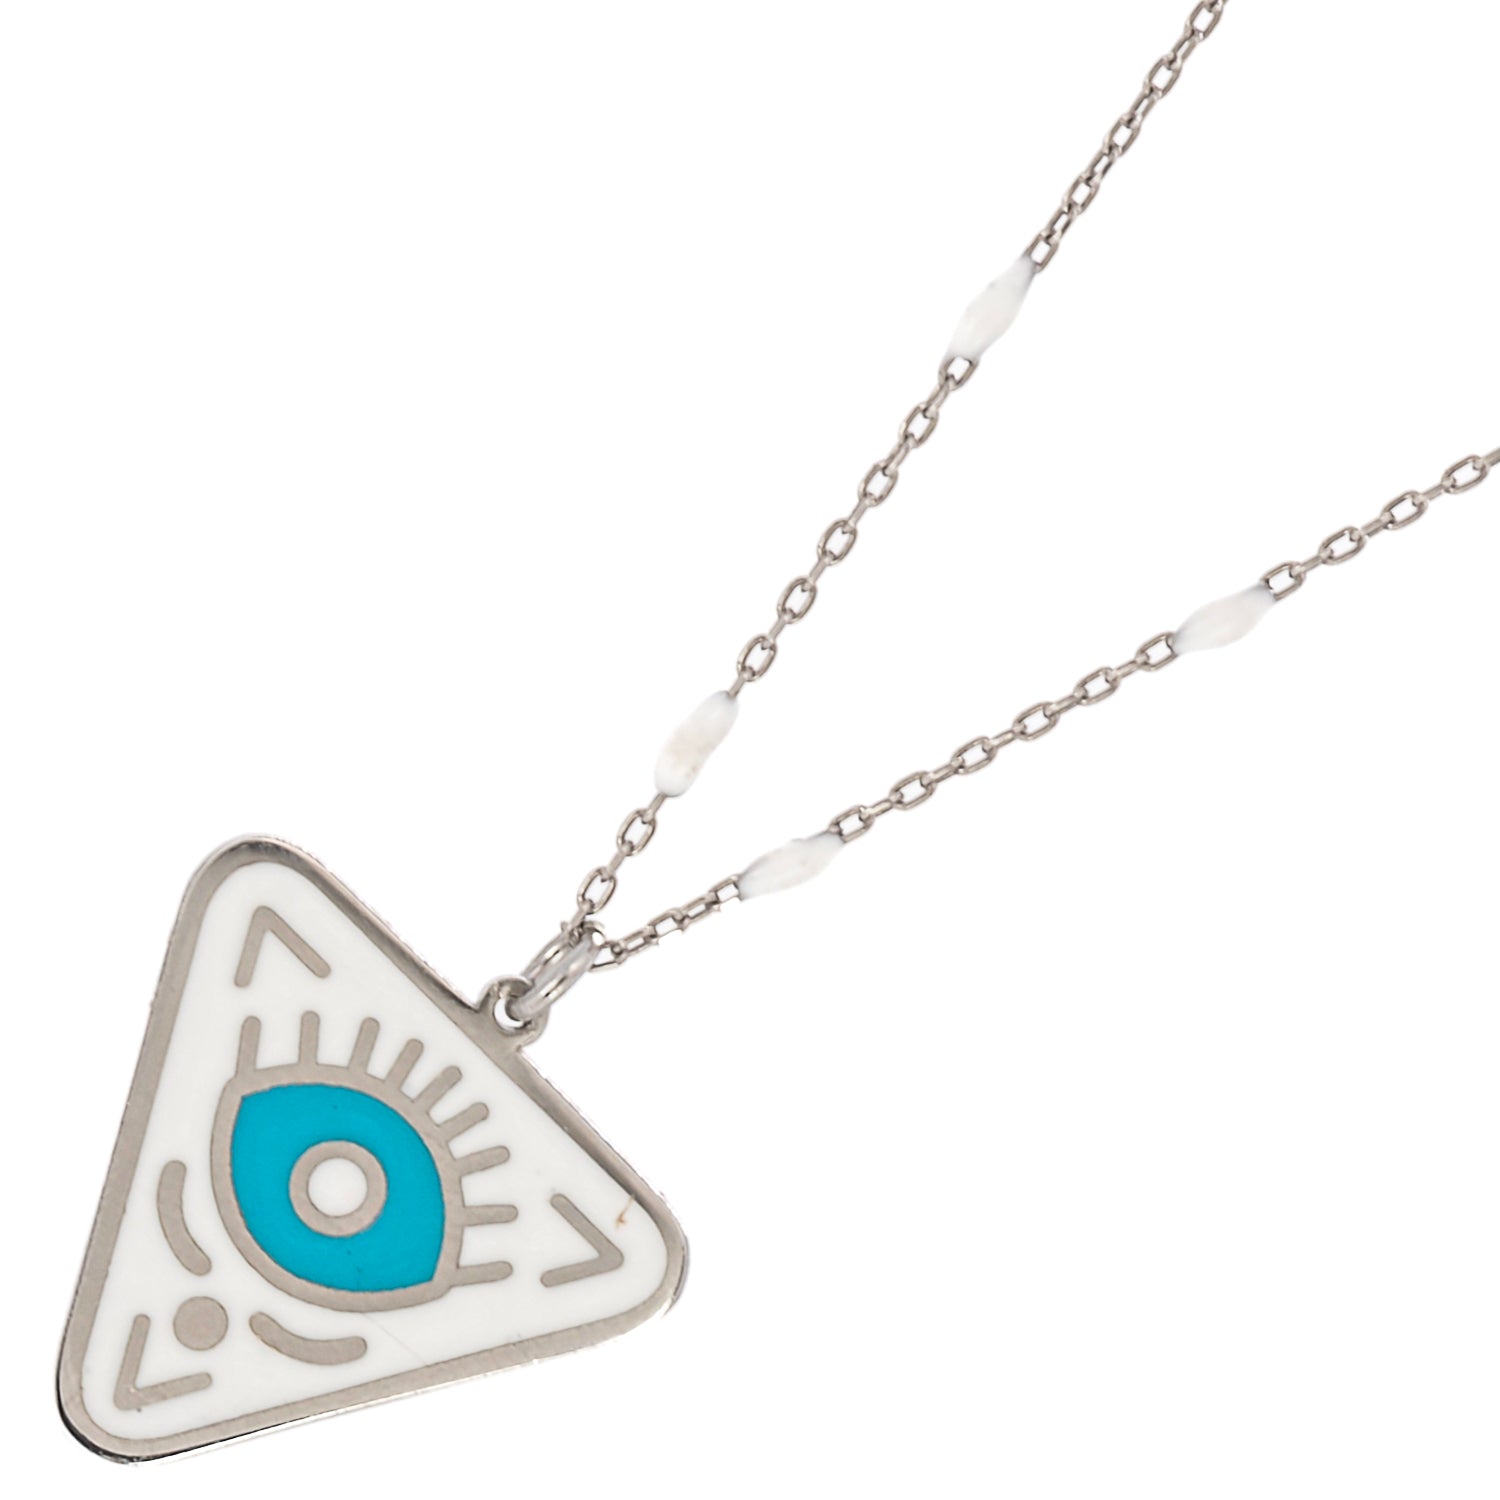 White and Turquoise Enamel Pendant - A fusion of protection and serenity.